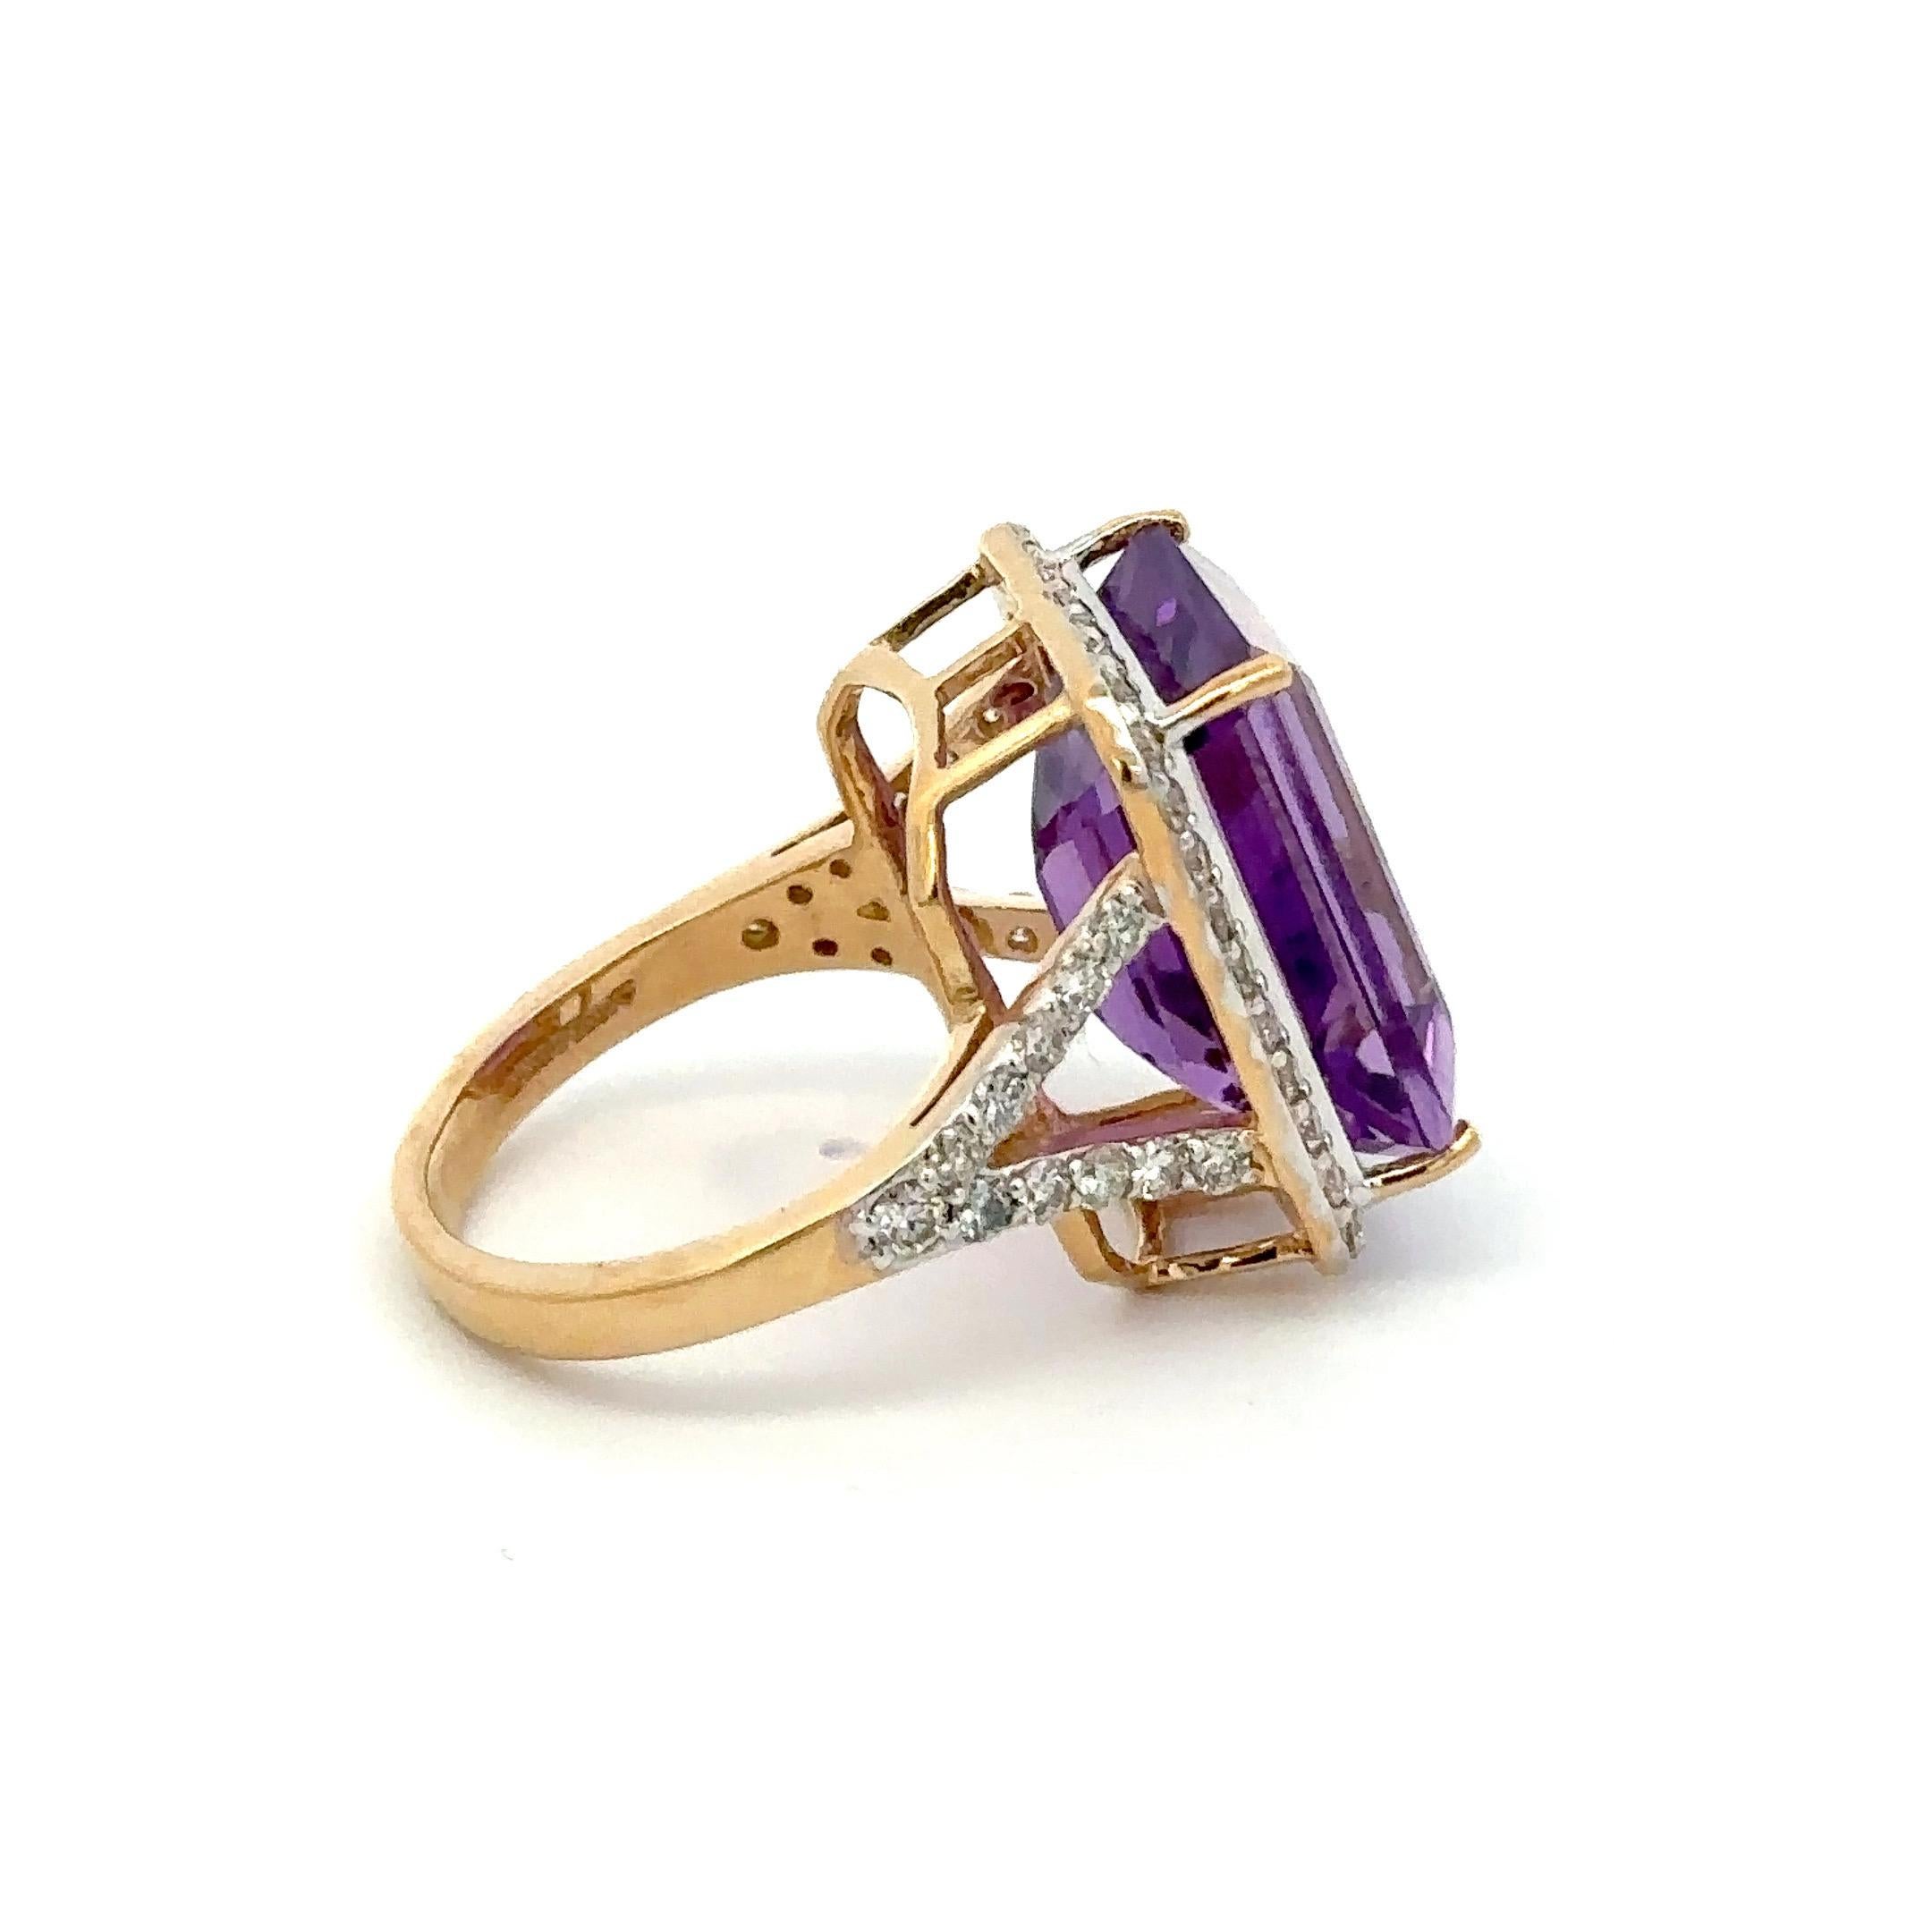 For Sale:  14k Solid Yellow Gold 13.33 Ct Large Octagon Amethyst and Diamond Cocktail Ring 13